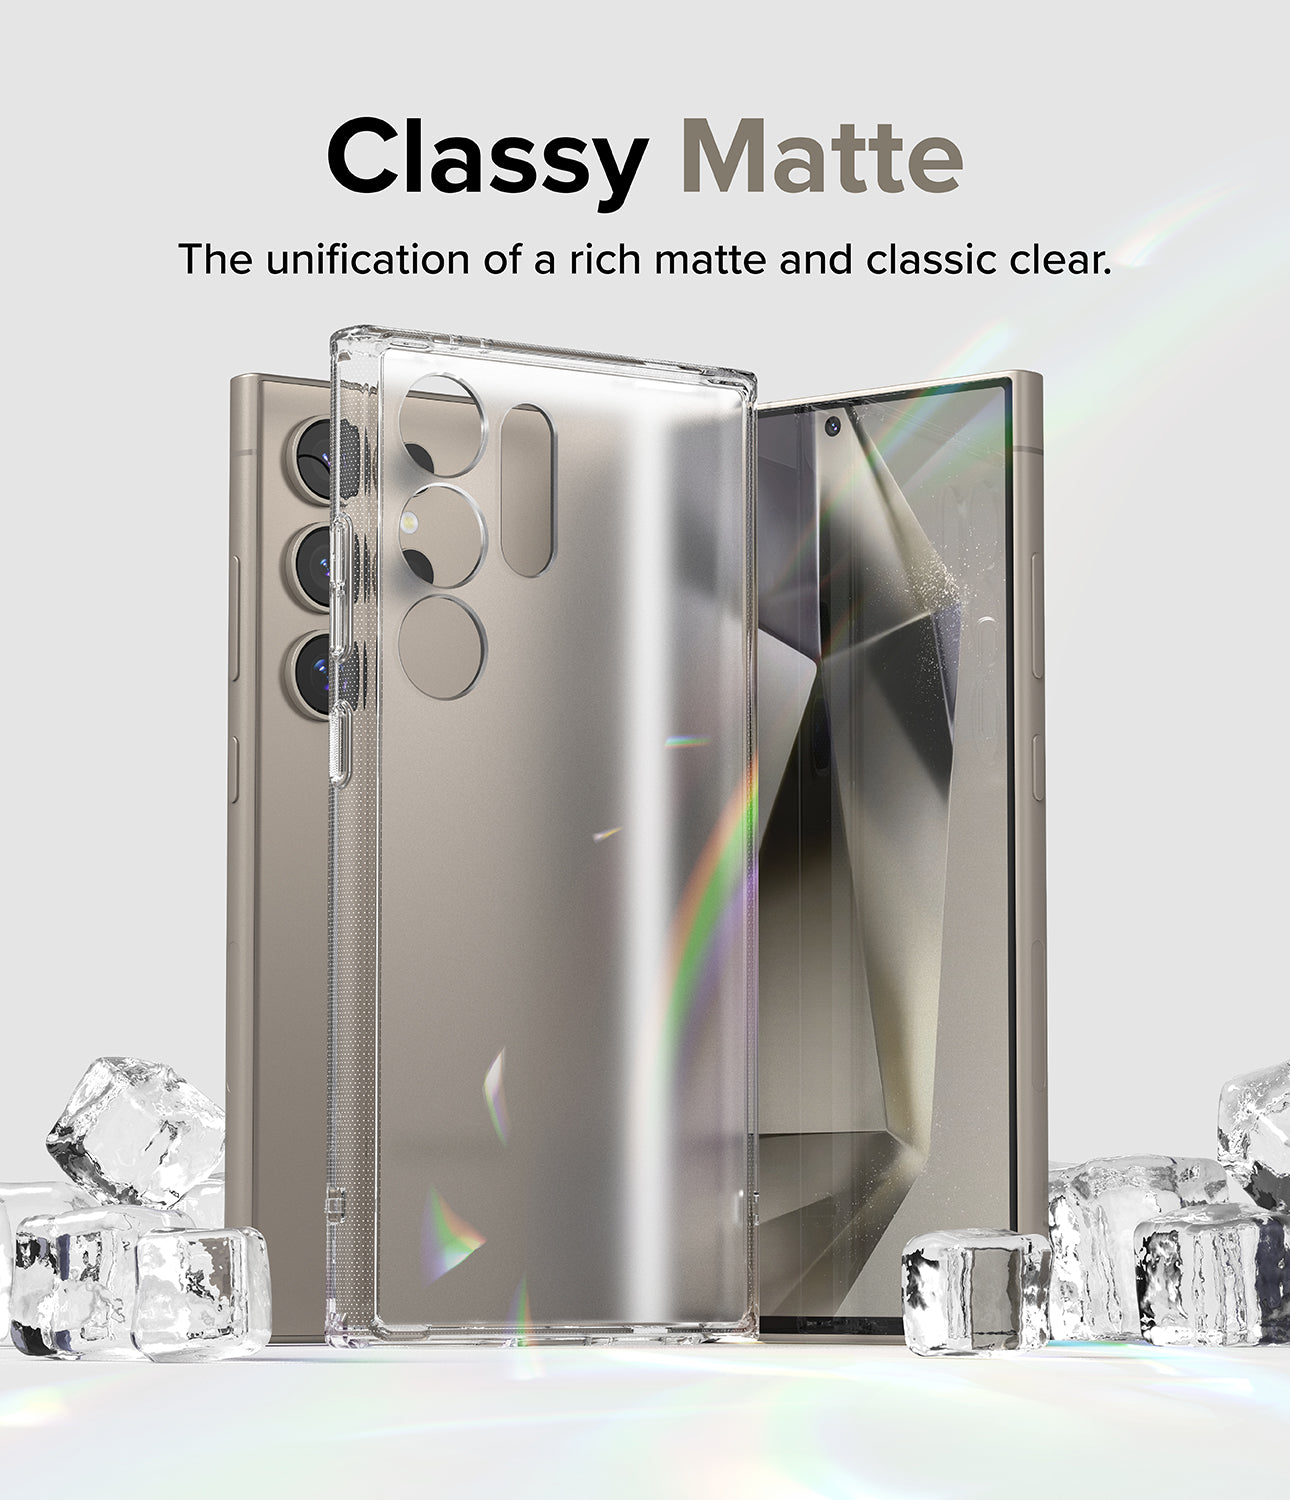 Galaxy S24 Ultra Case | Fusion Matte - Classy Matte. The unification of rich matte and classic clear.